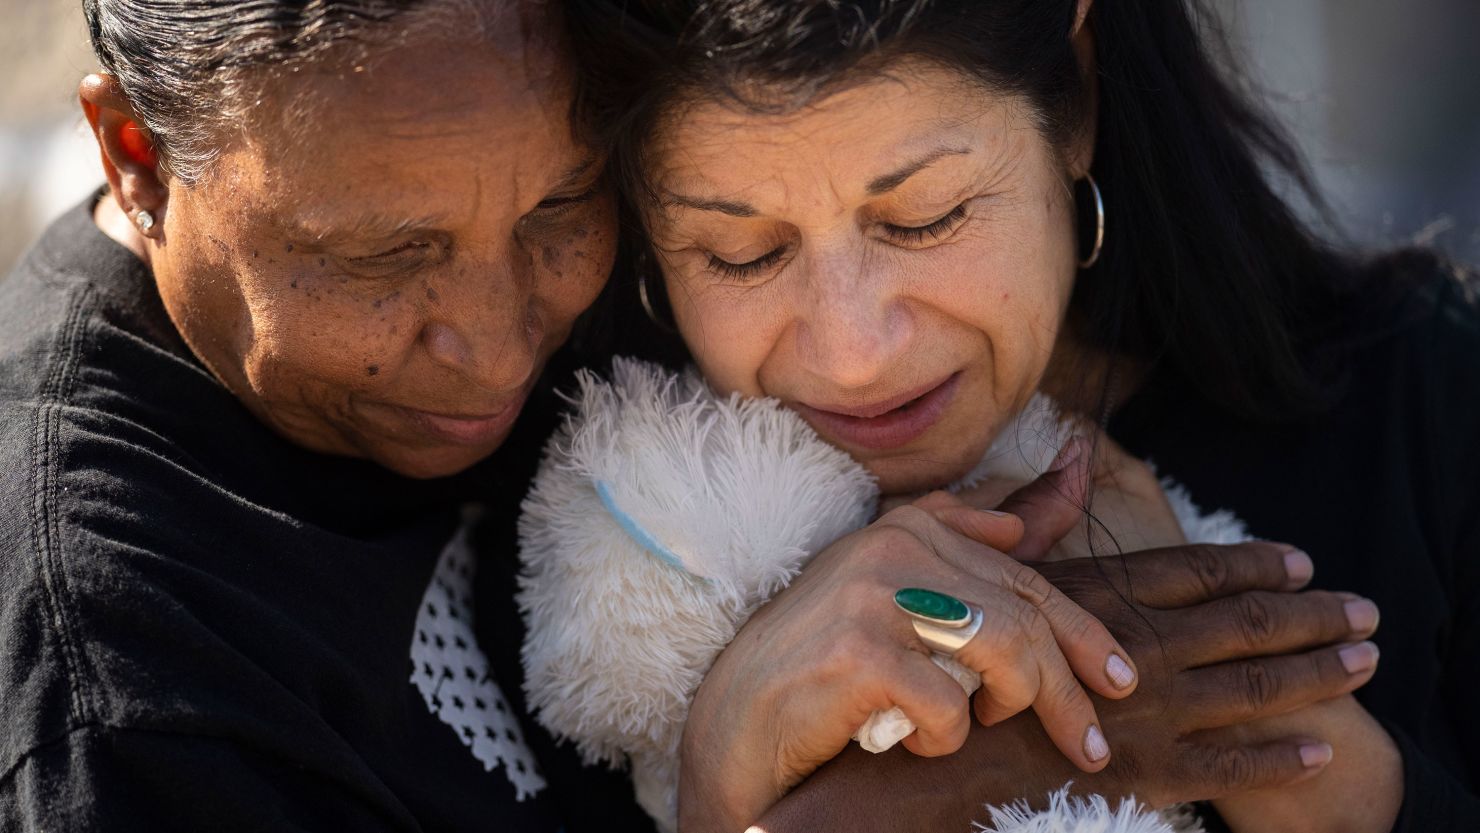 Jeanne LeGall hugs Claudia Carballada as she pays her respects at an makeshift memorial at the scene of a mass shooting at Tops Friendly Market in Buffalo, New York, on Sunday, May 15, 2022.